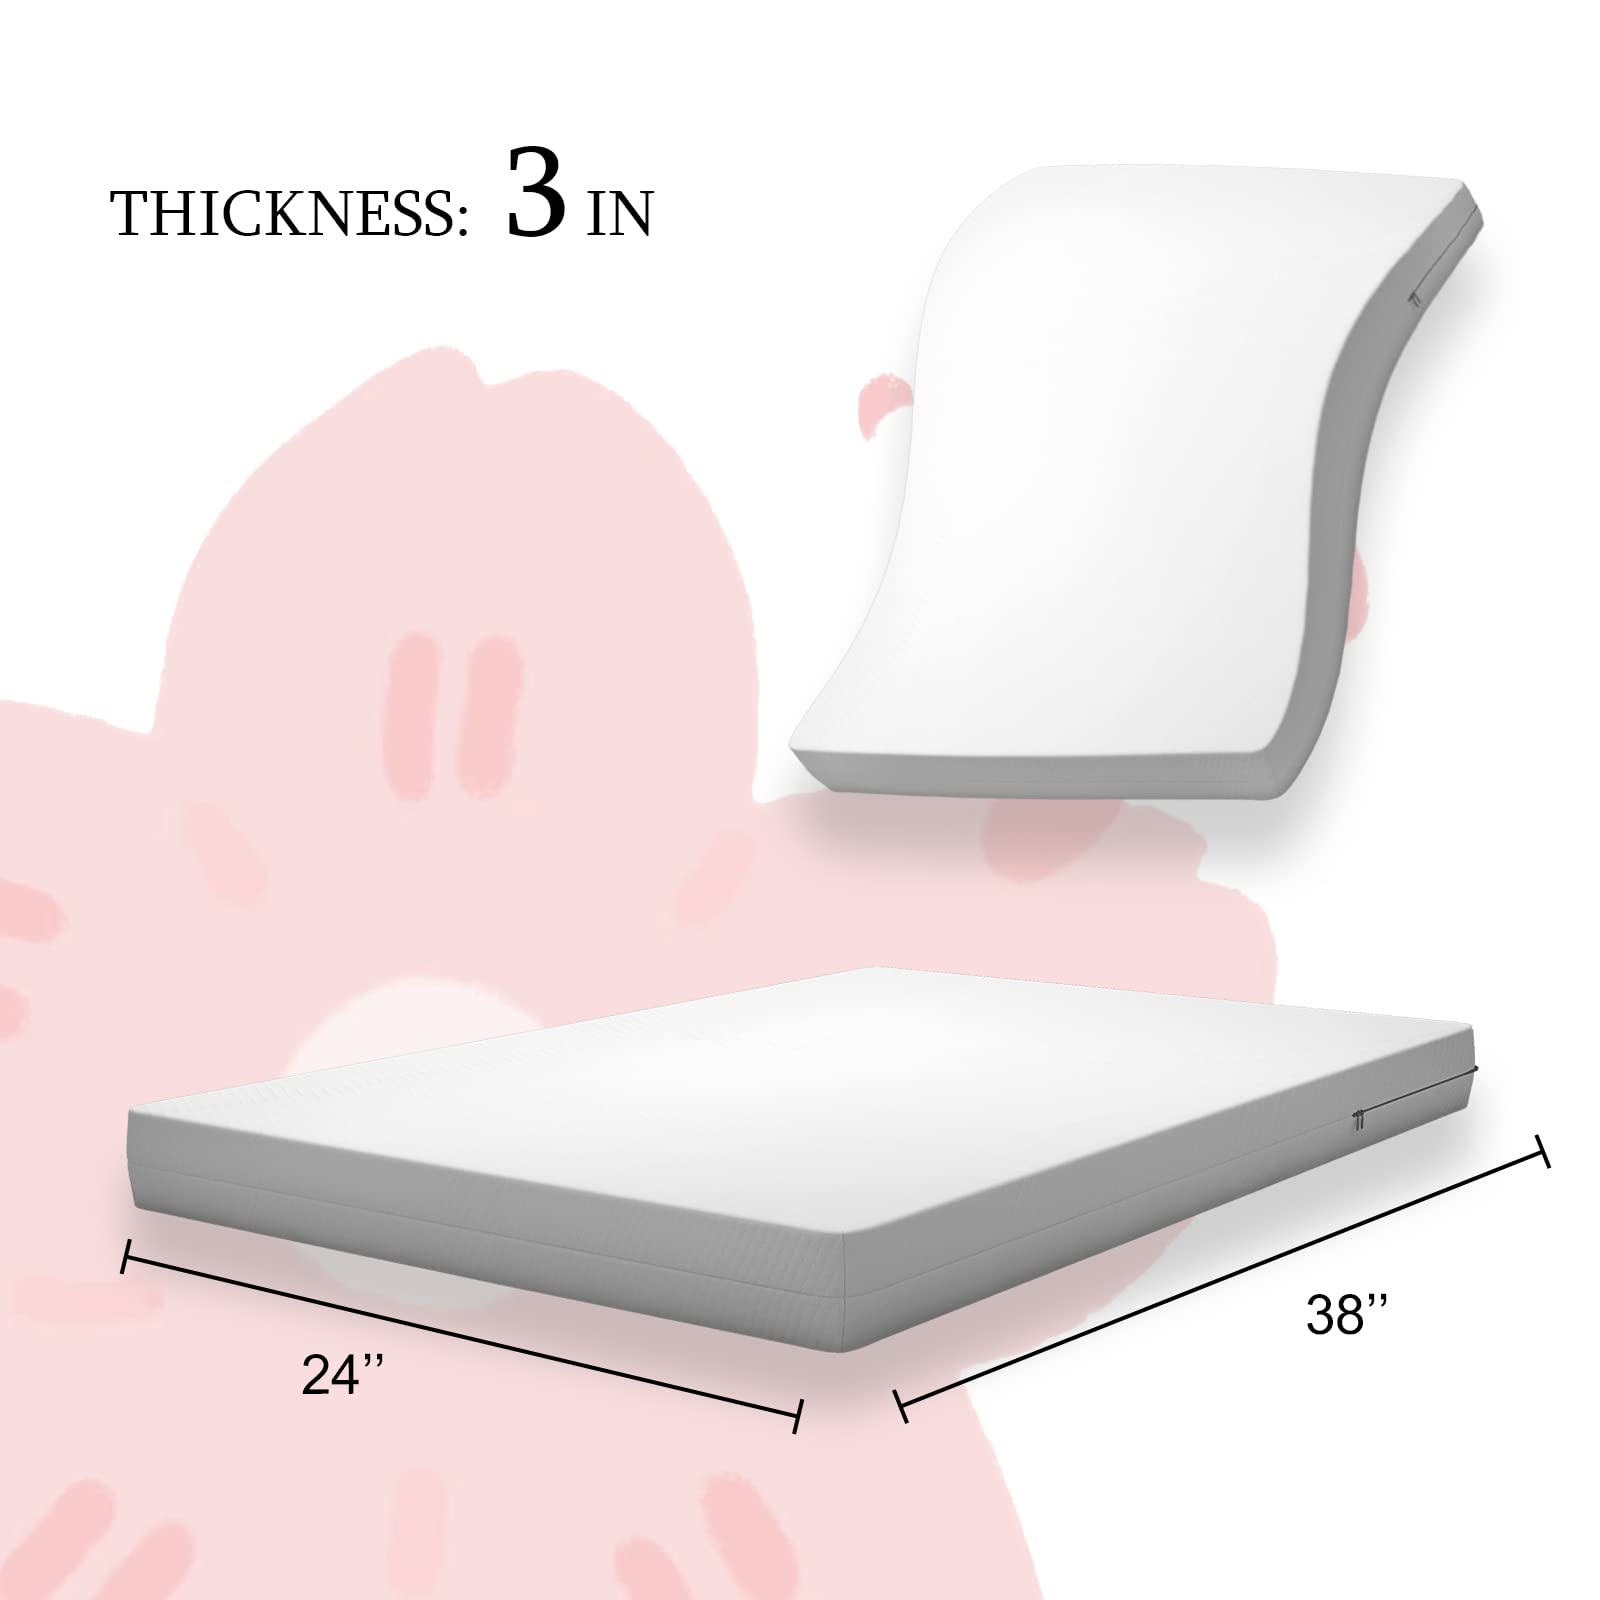 Ustenroya Pack n Play Mattress 38x24x3inch Travel Crib Mattress Portable & Lightweight Baby Mattresses, Removable Washable Cover 1'' Memory Foam & 2'' Foam for Dual Size Use